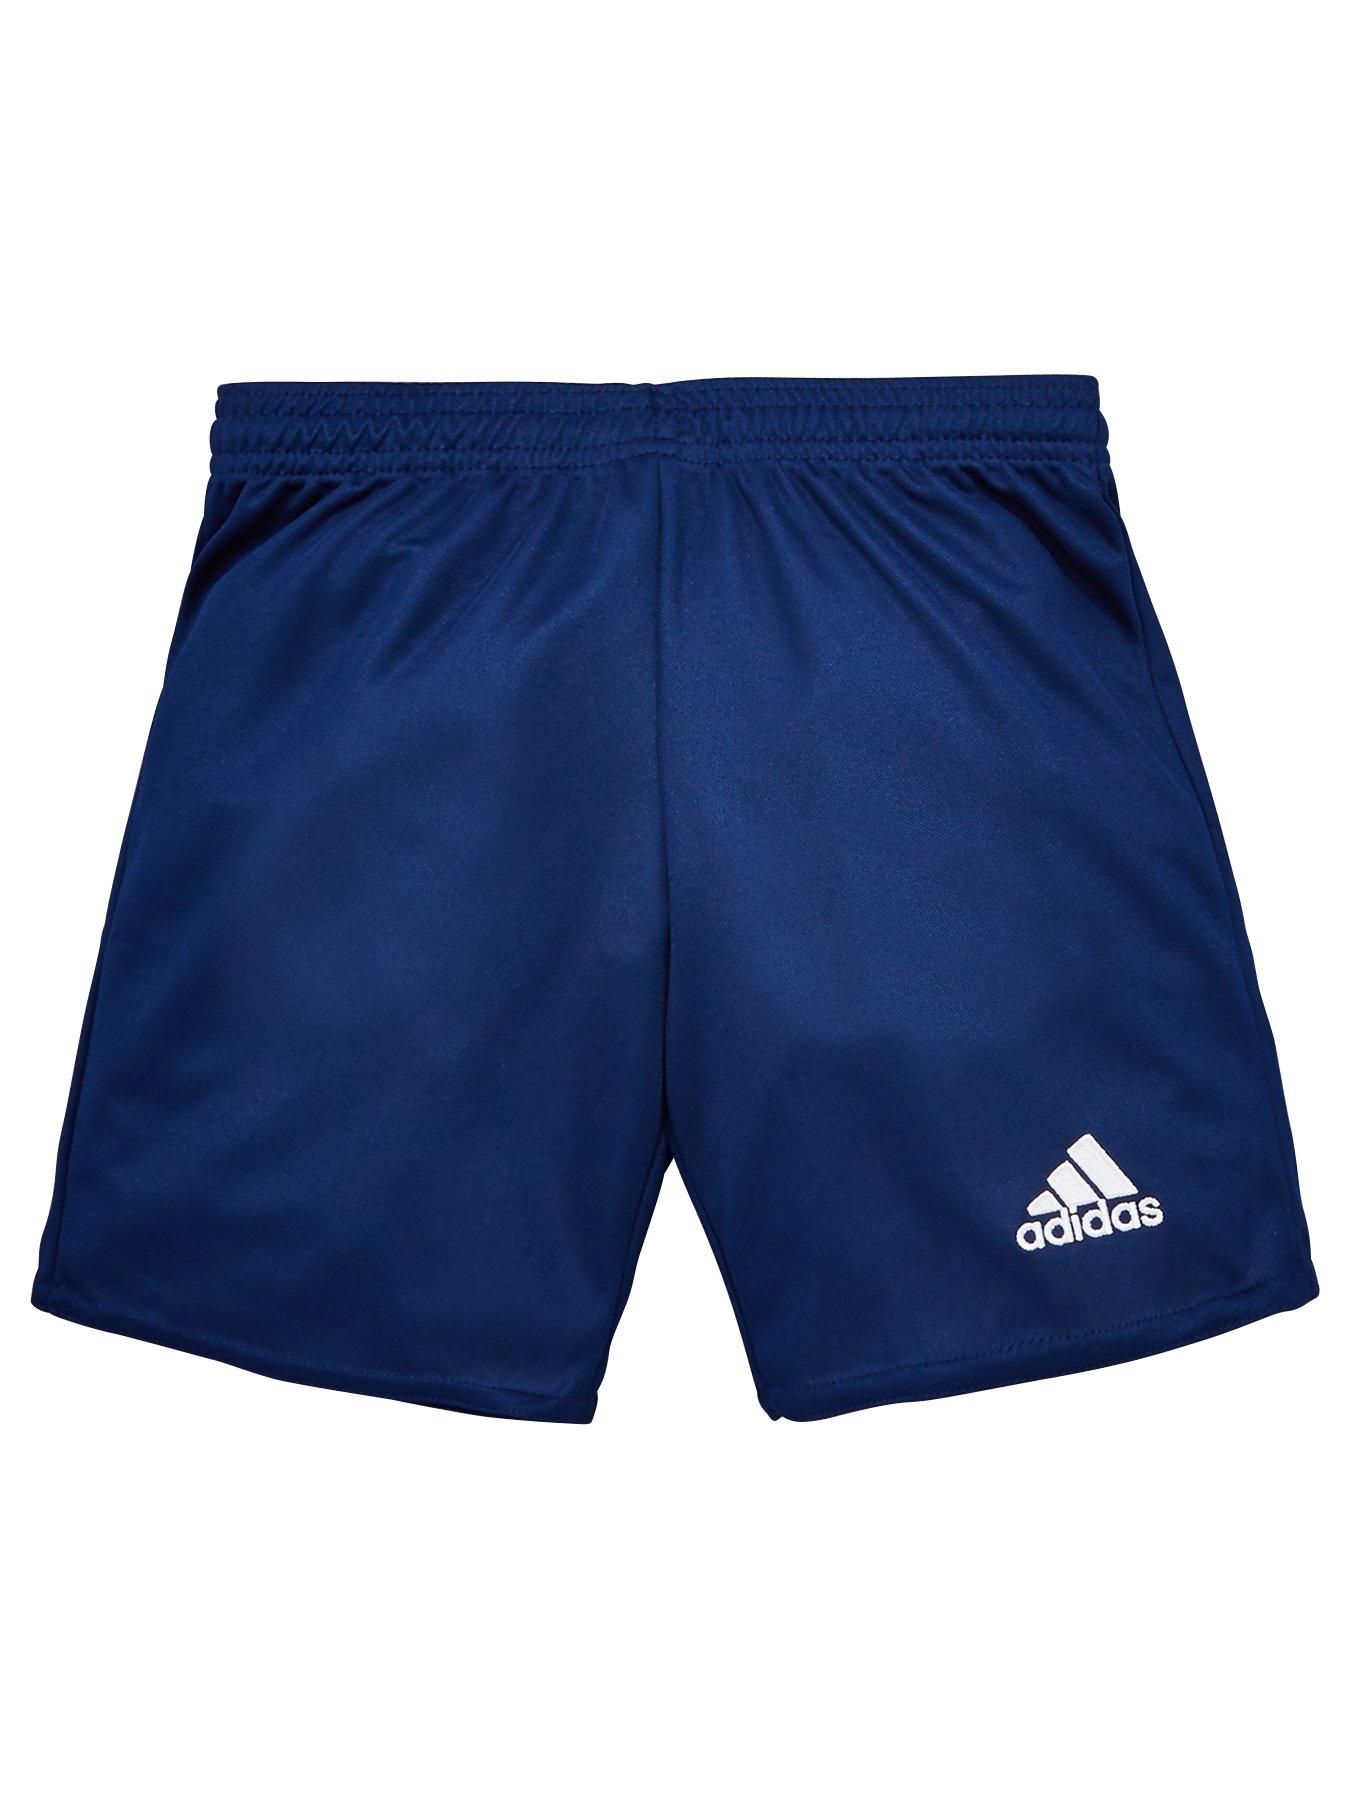 adidas youth parma 16 shorts size guide